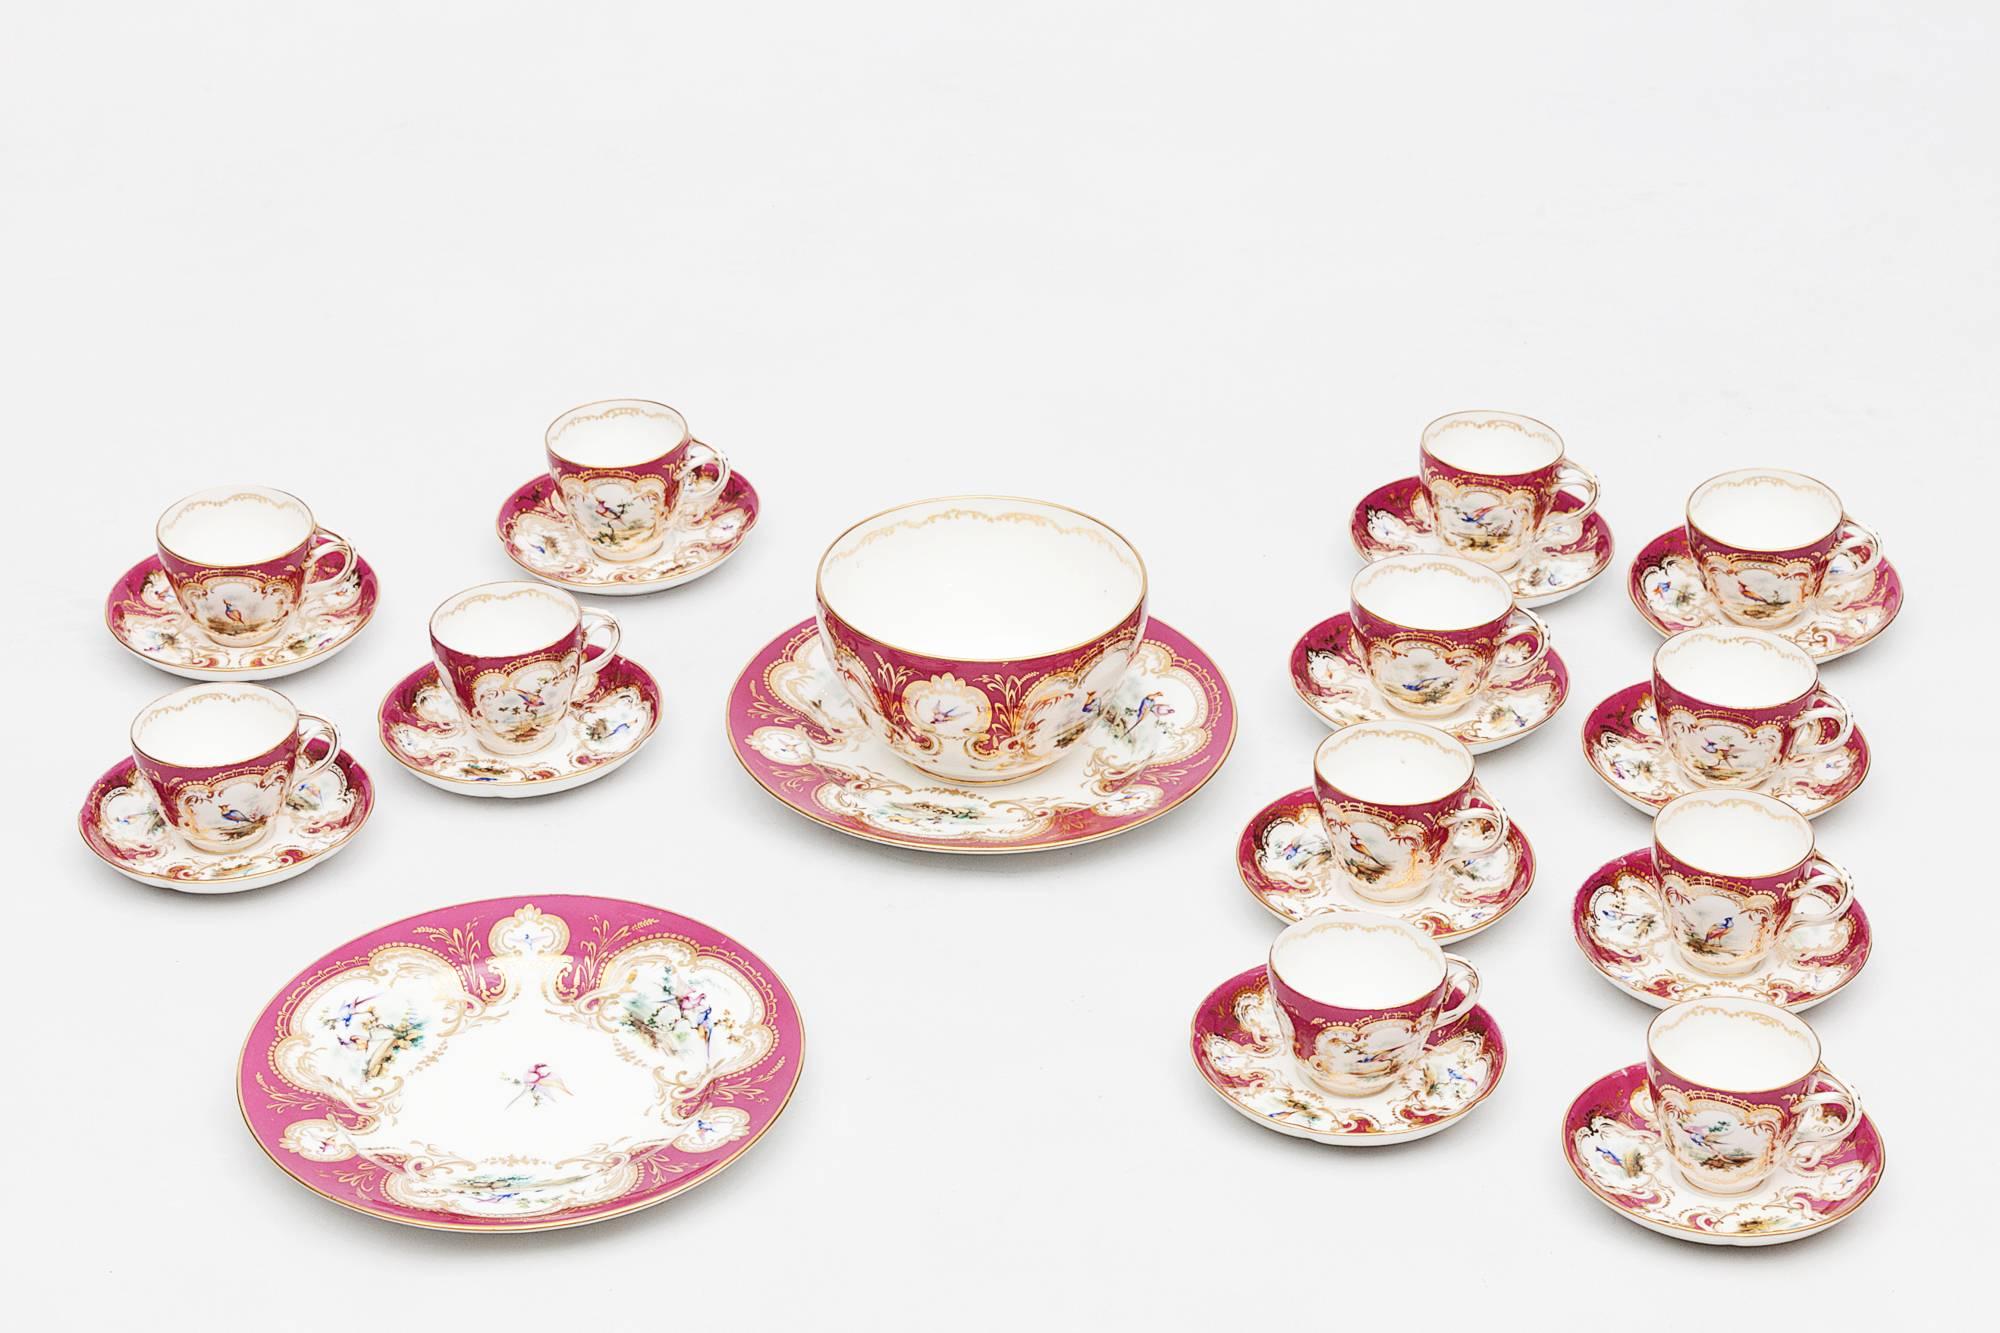 19th century Coalport raspberry and gilt tea service. Hand-painted with exotic birds. Comprising: 12 cups, 12 saucers, two cake plates and one tea bowl.

Very early Coalport porcelain was unmarked, (circa 1805 and before) and in reality marks were